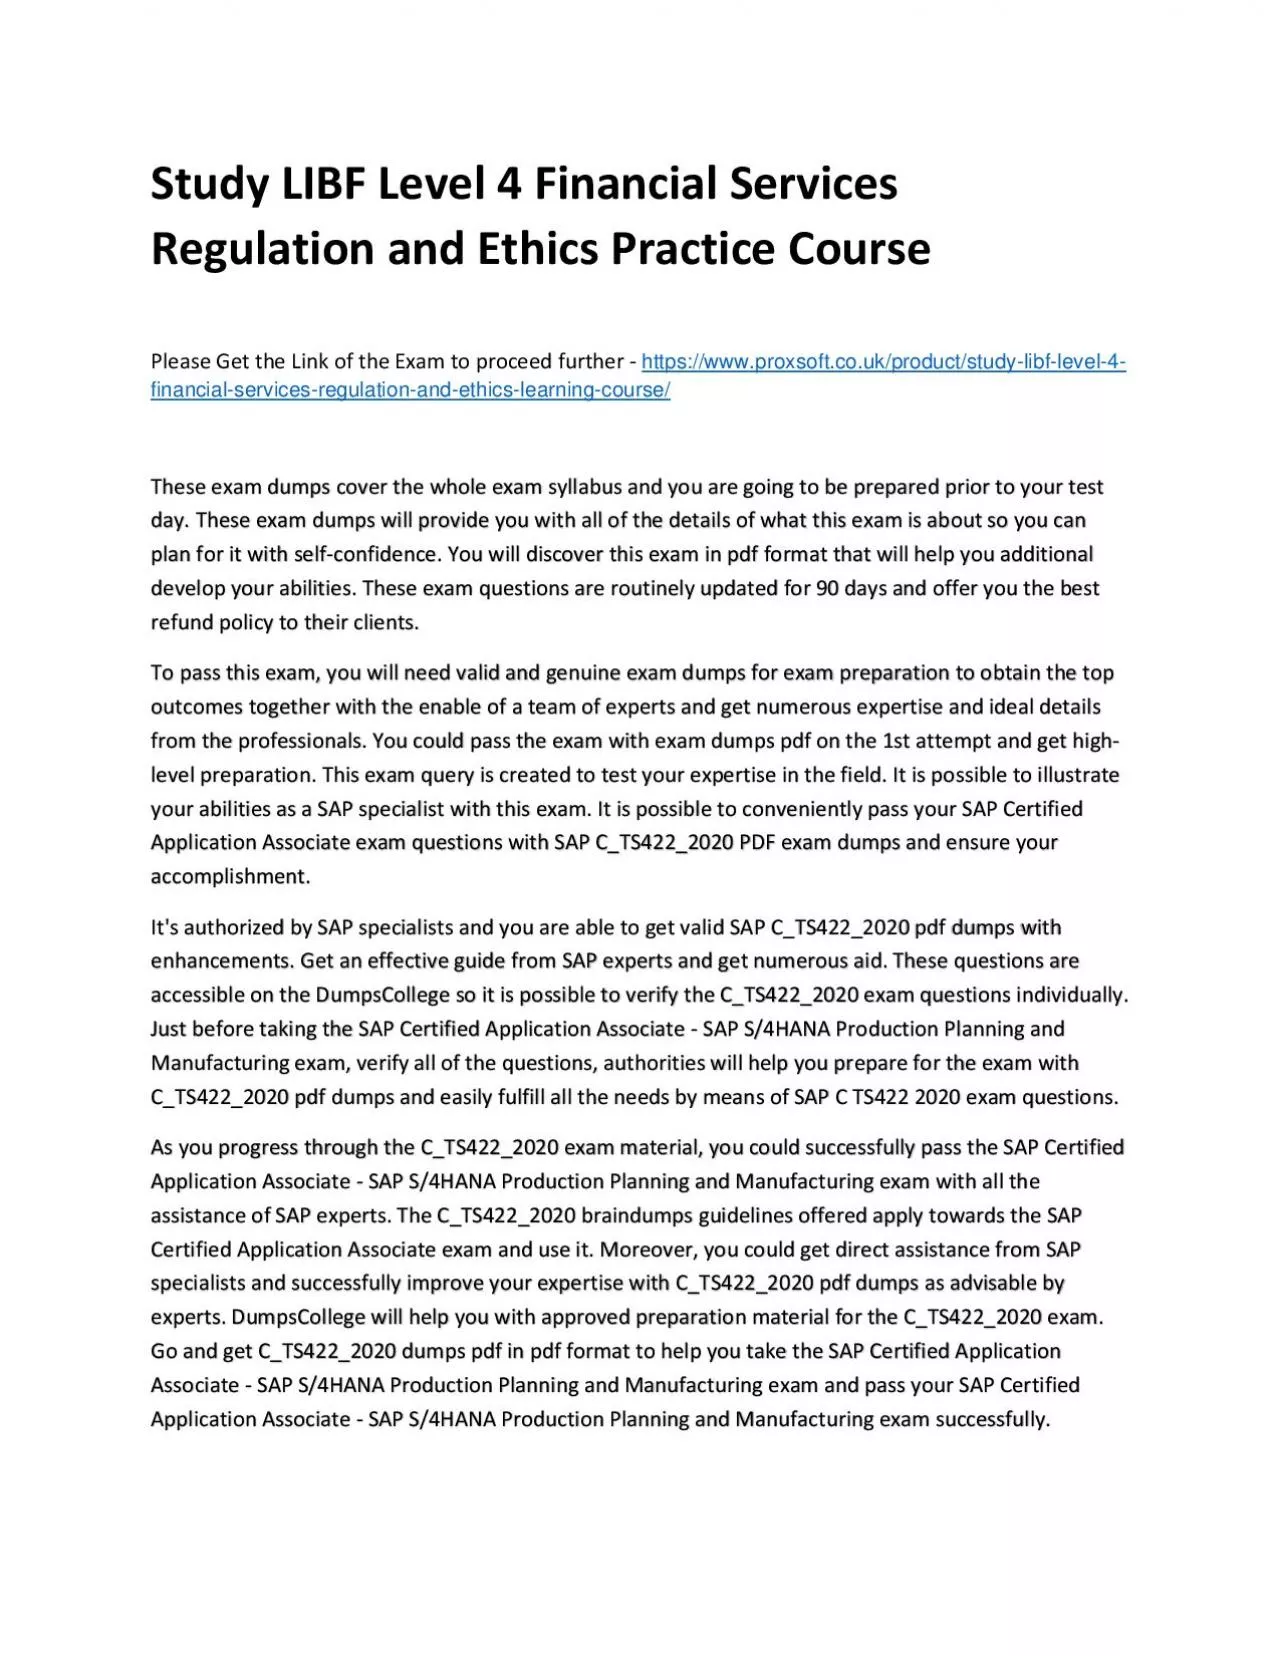 Study LIBF Level 4 Financial Services Regulation and Ethics Practice Course